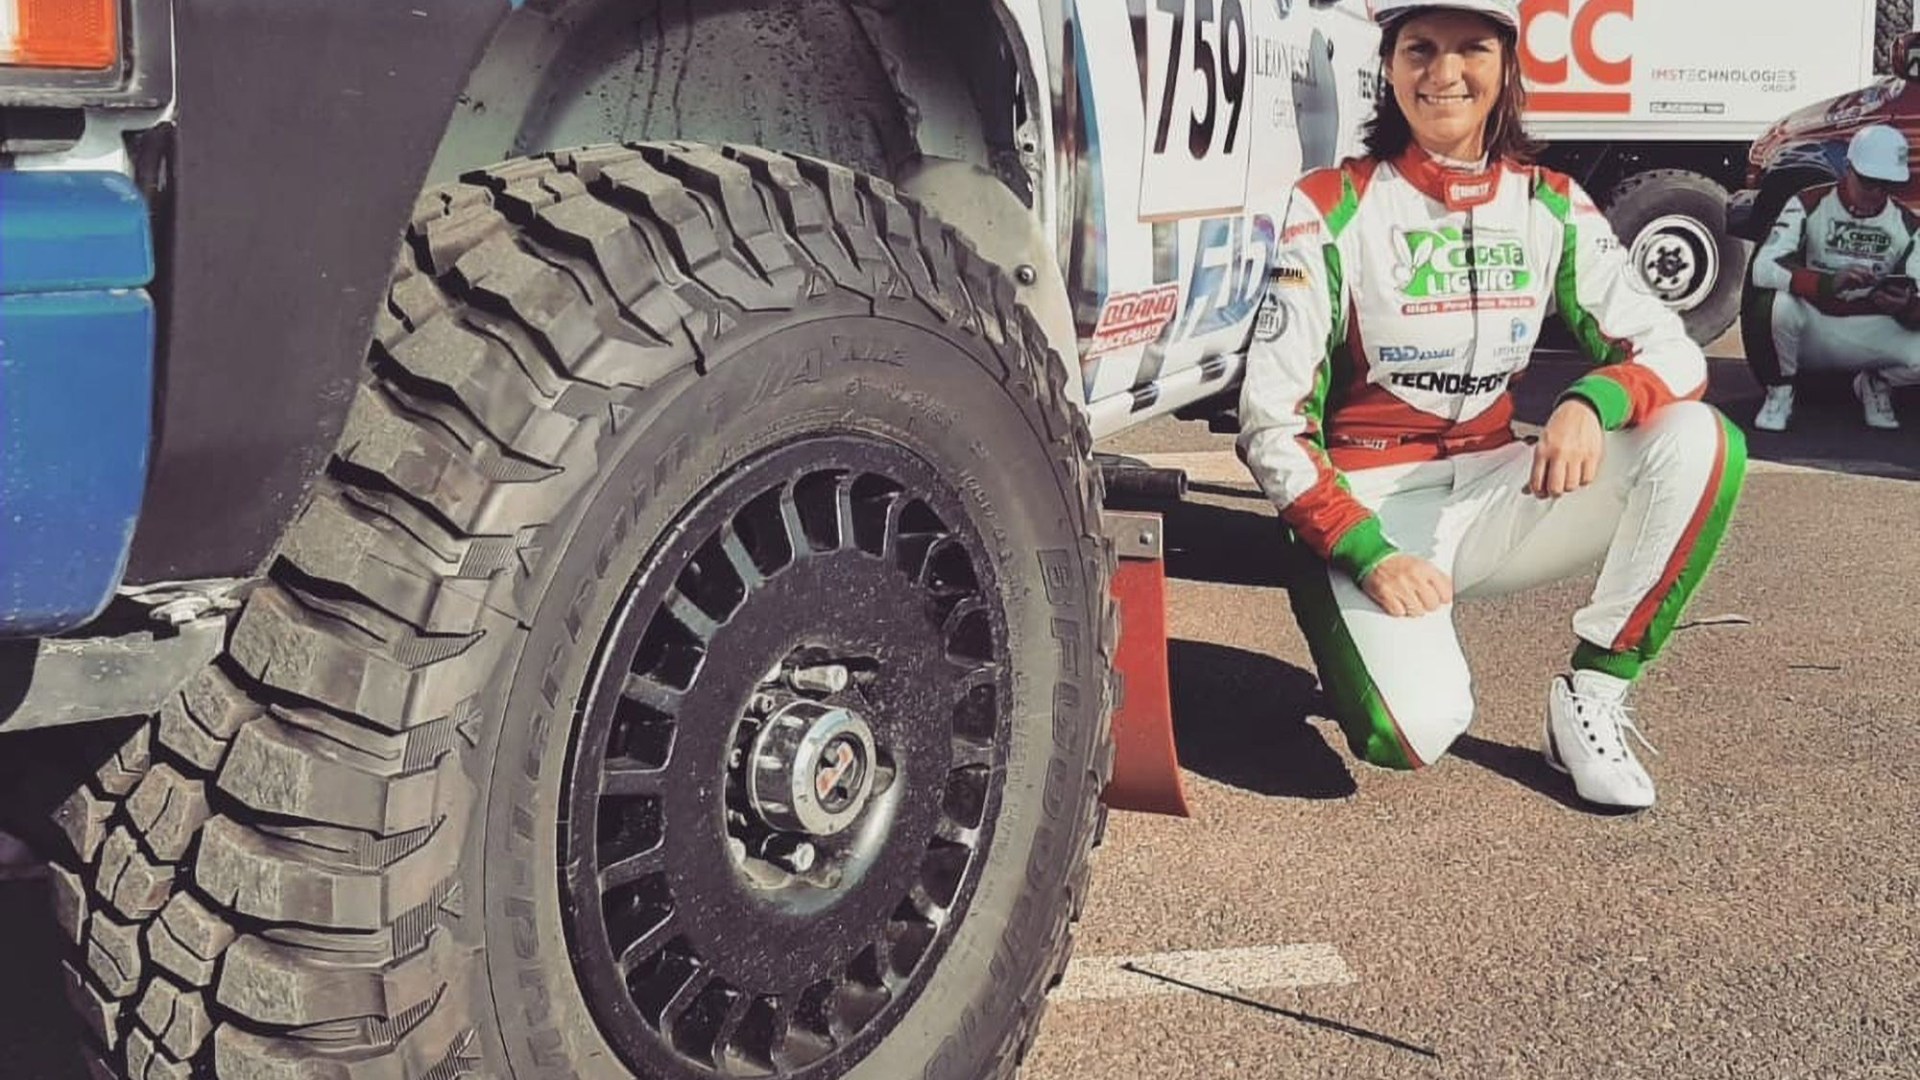 Italian rally champion Giulia Maroni, 37, dies in horror plunge 164ft plunge onto rocks in fall while on hike